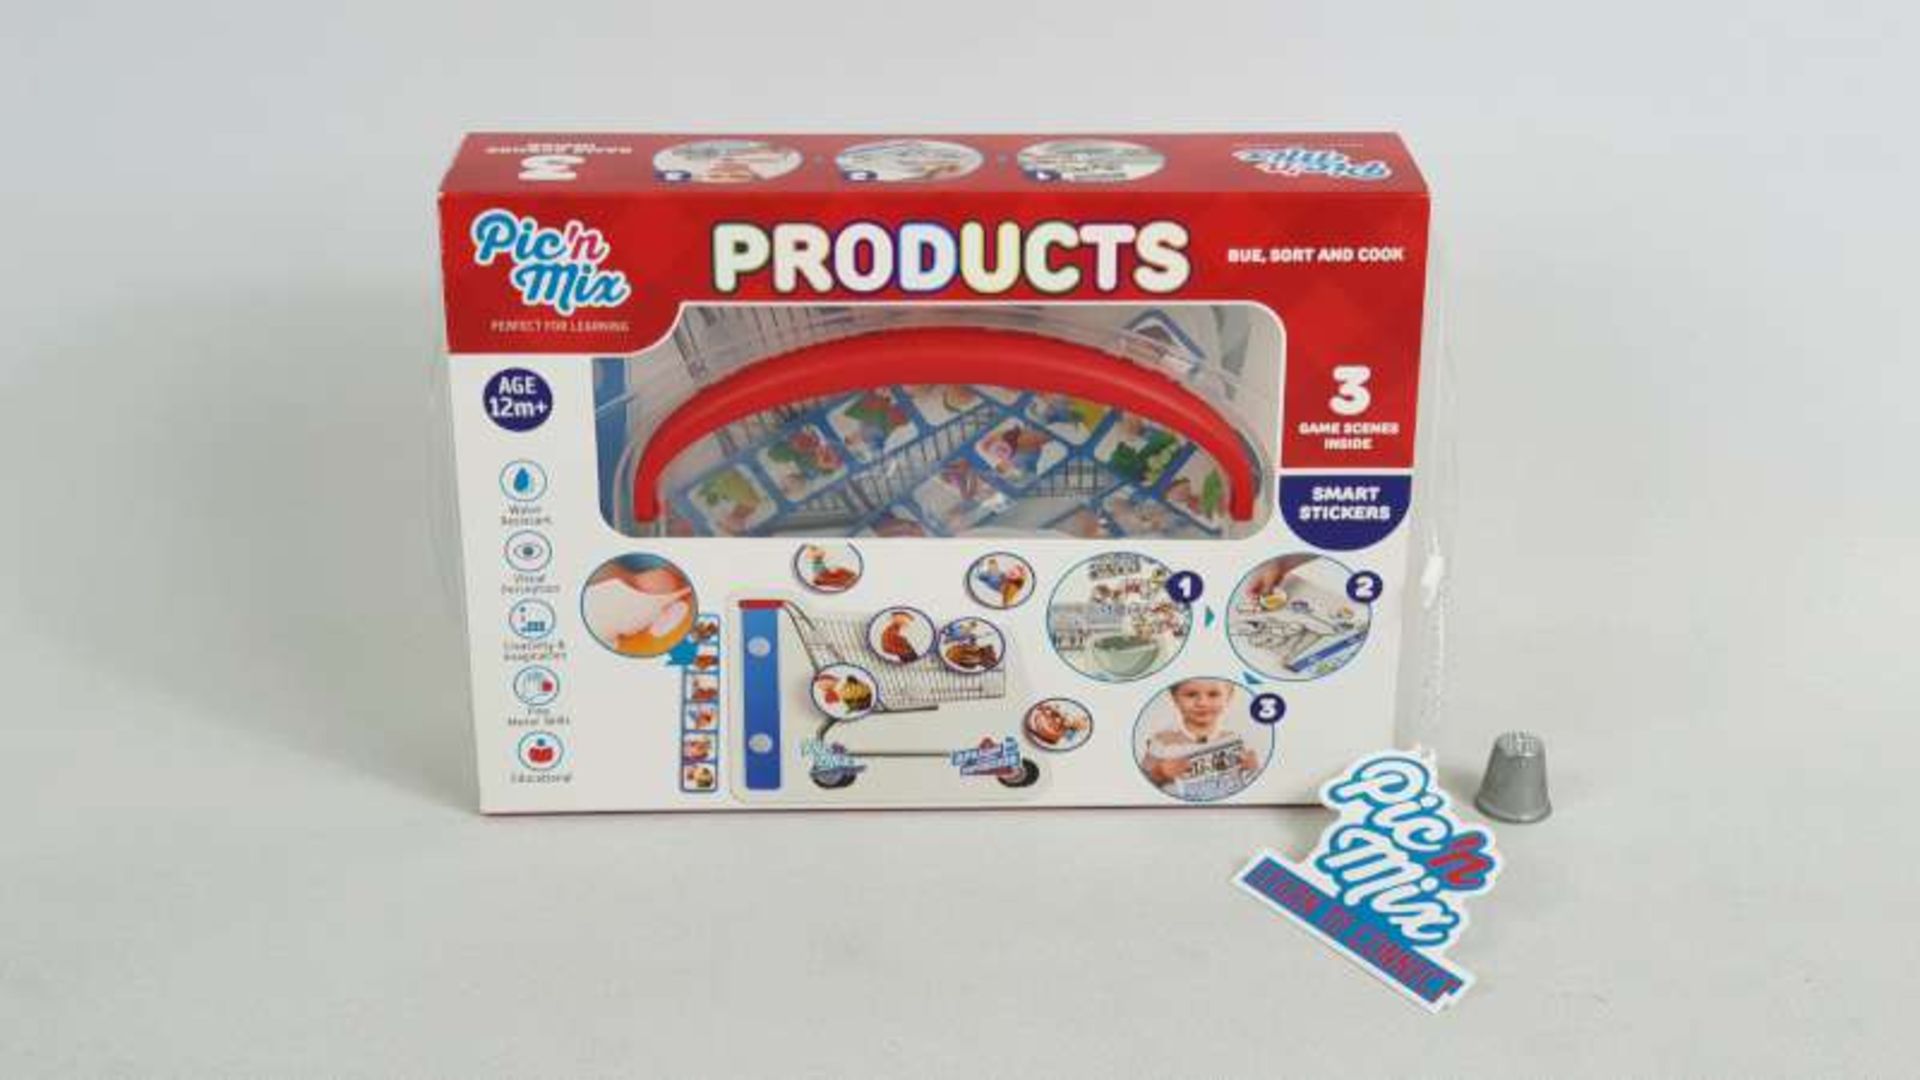 24 X BRAND NEW BOXED PIC N MIX PRODUCTS EDUCATIONAL LEARNING GAMES IN 1 BOX